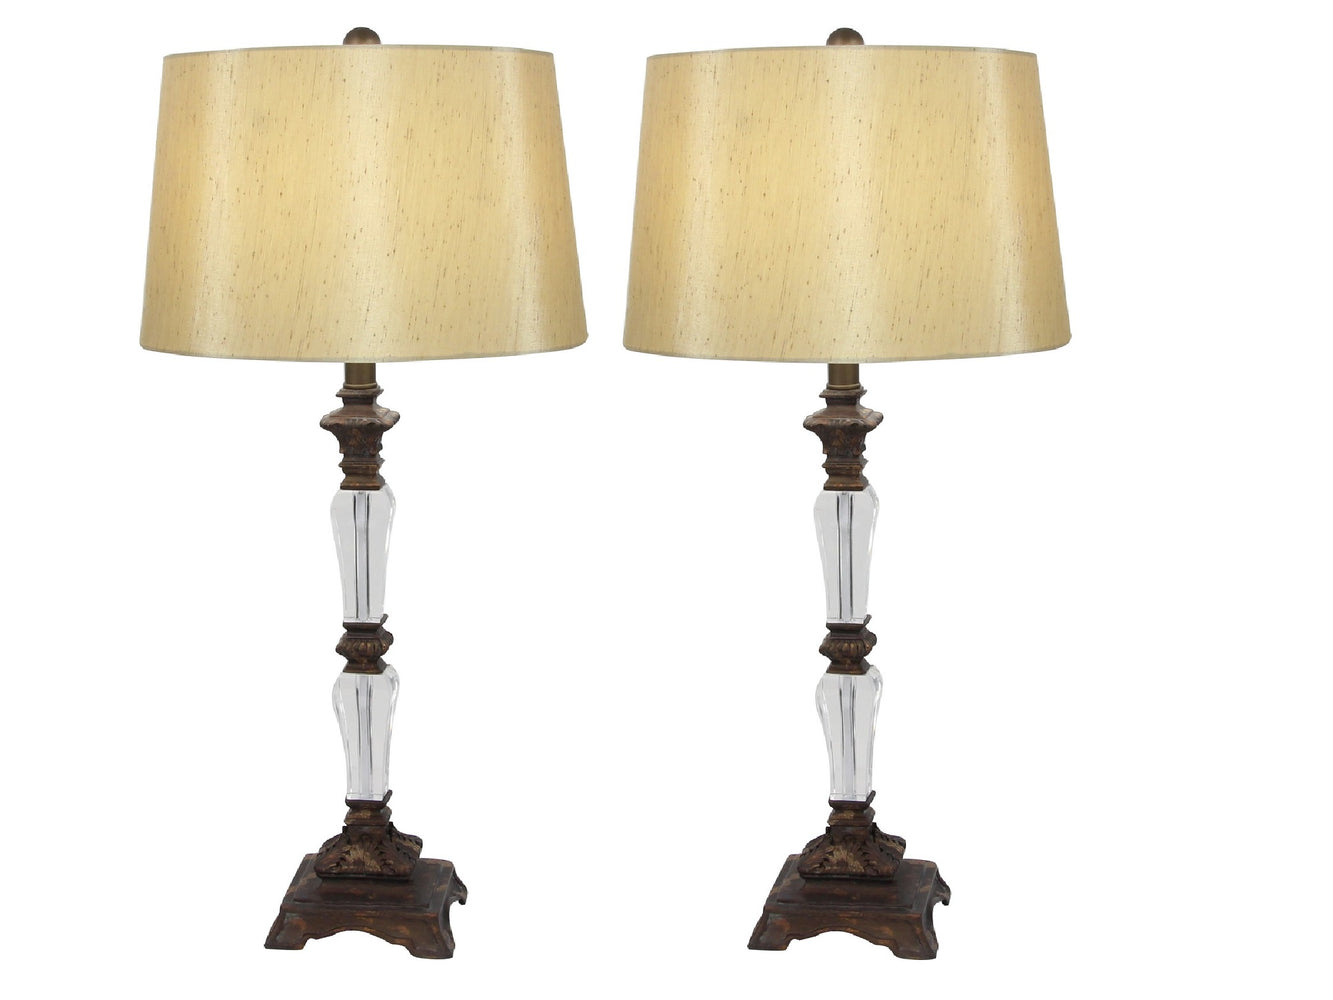 Urban Designs Classic Acrylic Brown Candleholder Table Lamp (Set of 2)